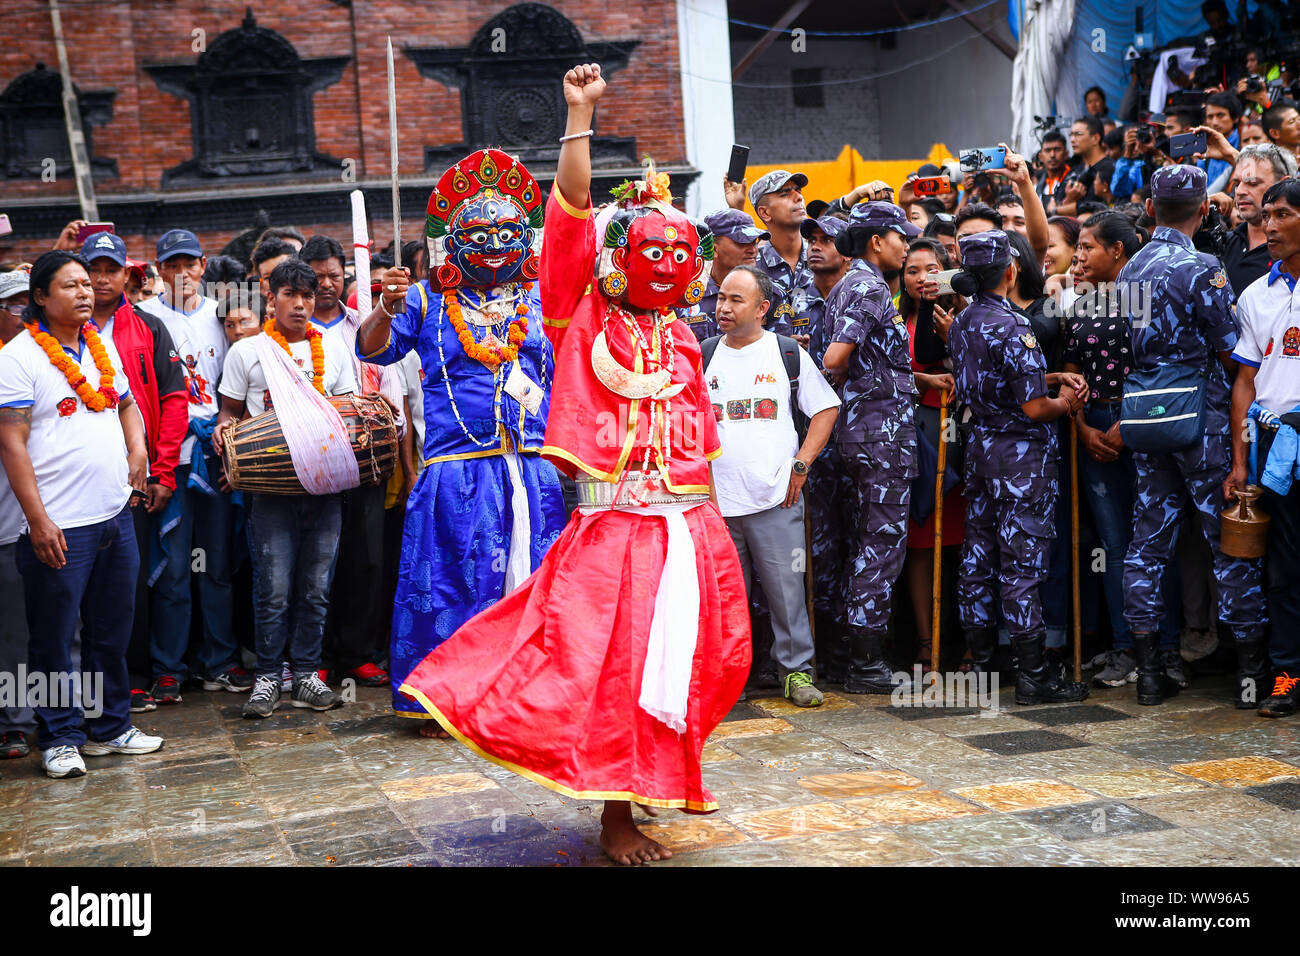 Kathmandu, Nepal. 13th Sep, 2019. Masked dancers perform during the main day of the Indra Jatra festival.People across the country attended the eight-day long festival which is celebrated to honour Indra, the king of gods and god of rains. During the festival the living goddess is taken around the city in the chariot in a religious procession through parts of the capital by Nepalese Hindus and Buddhists. The festival also marks the end of the monsoon. Credit: SOPA Images Limited/Alamy Live News Stock Photo